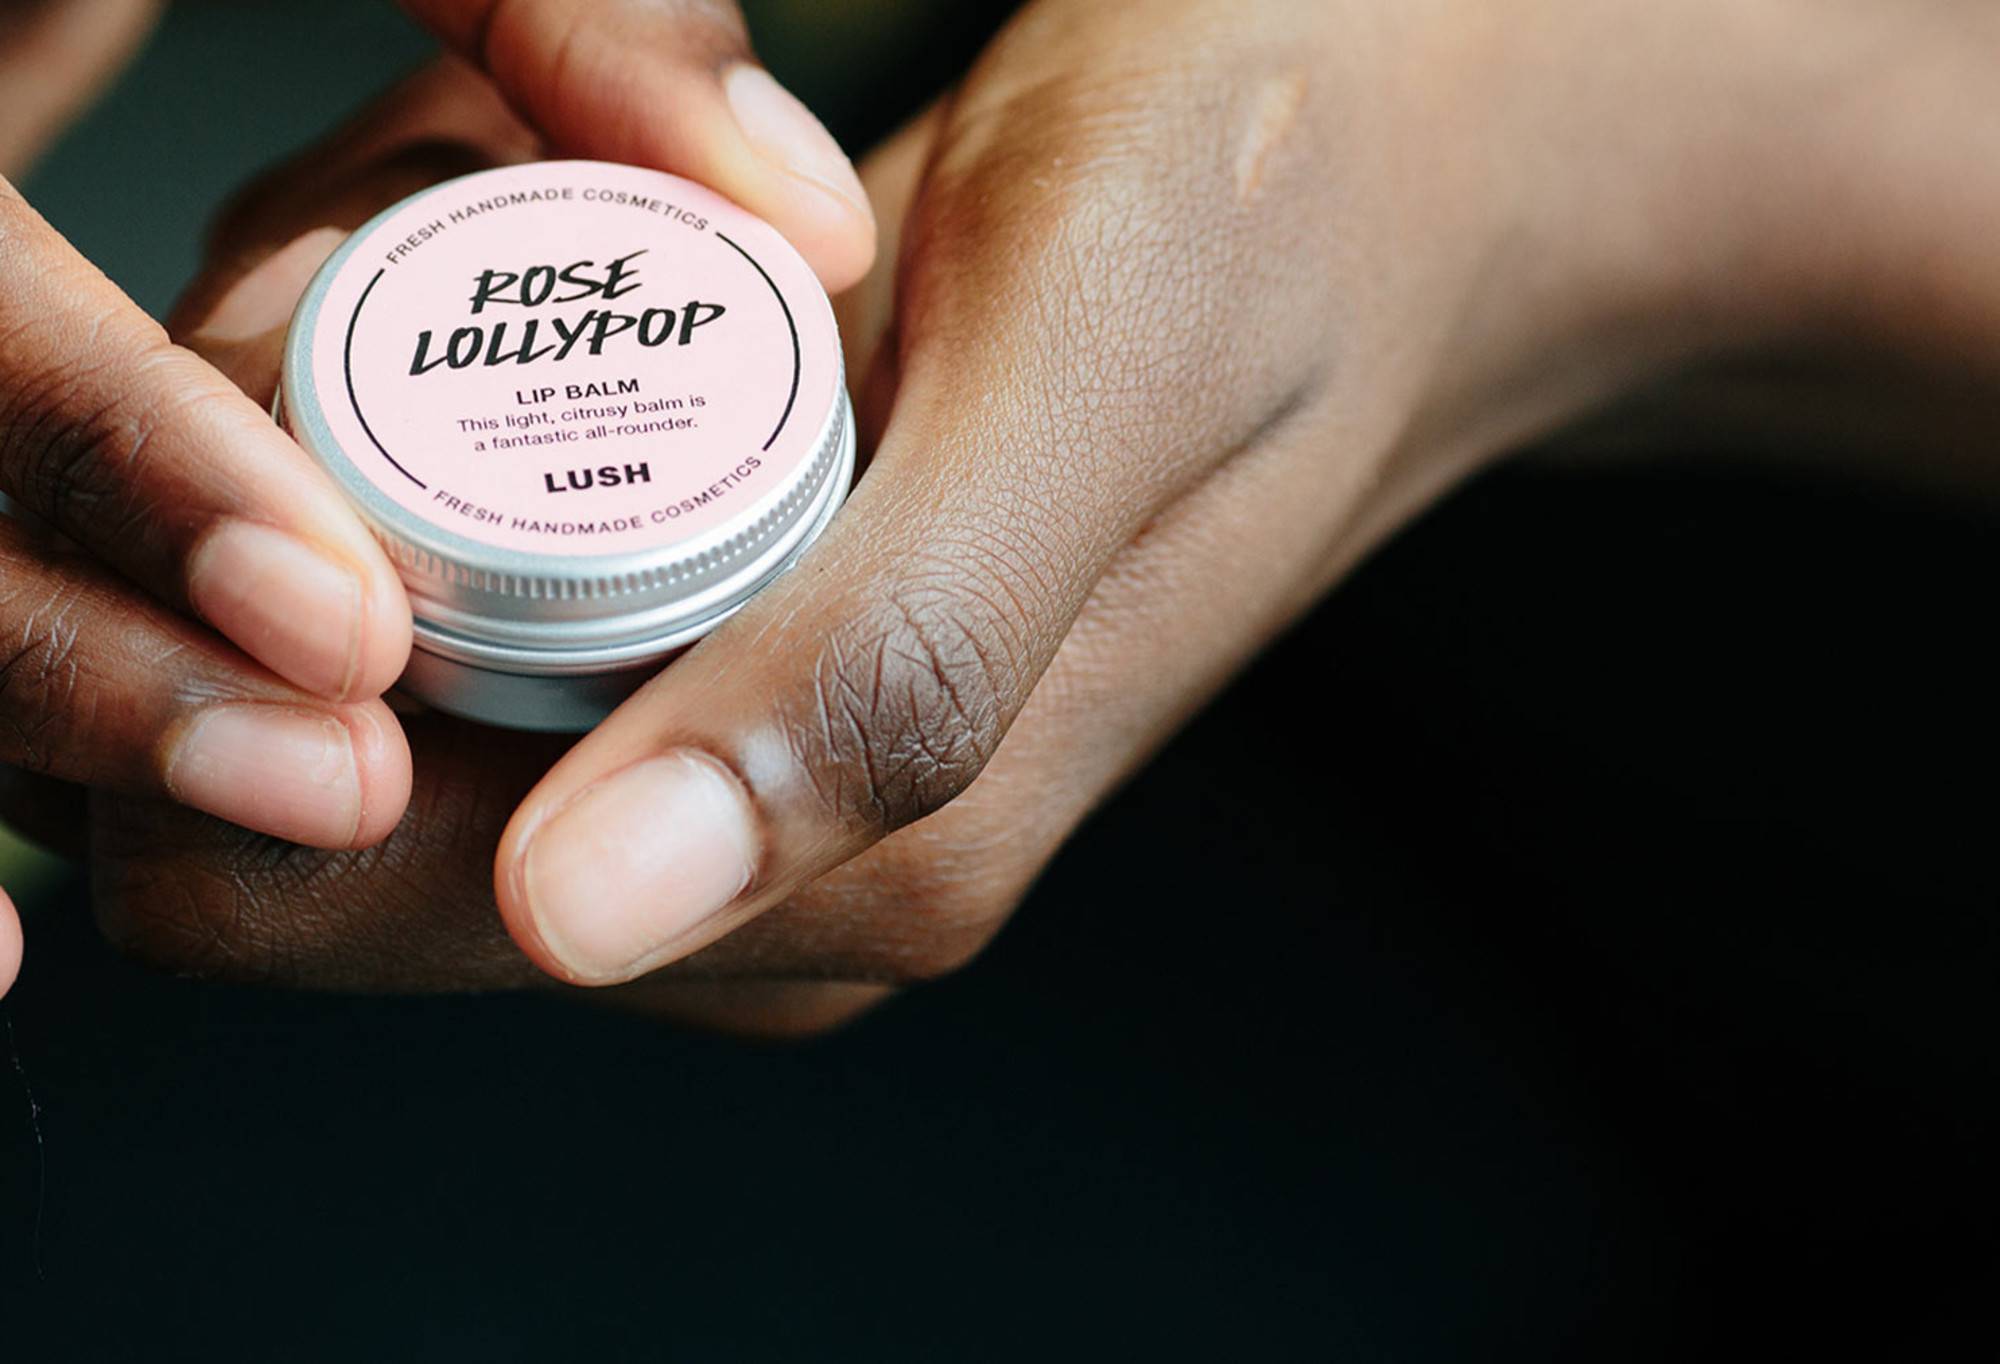 A small, metal tin, with a rosy pink label stating Rose Lollipop lip balm is held, as if about to be opened.